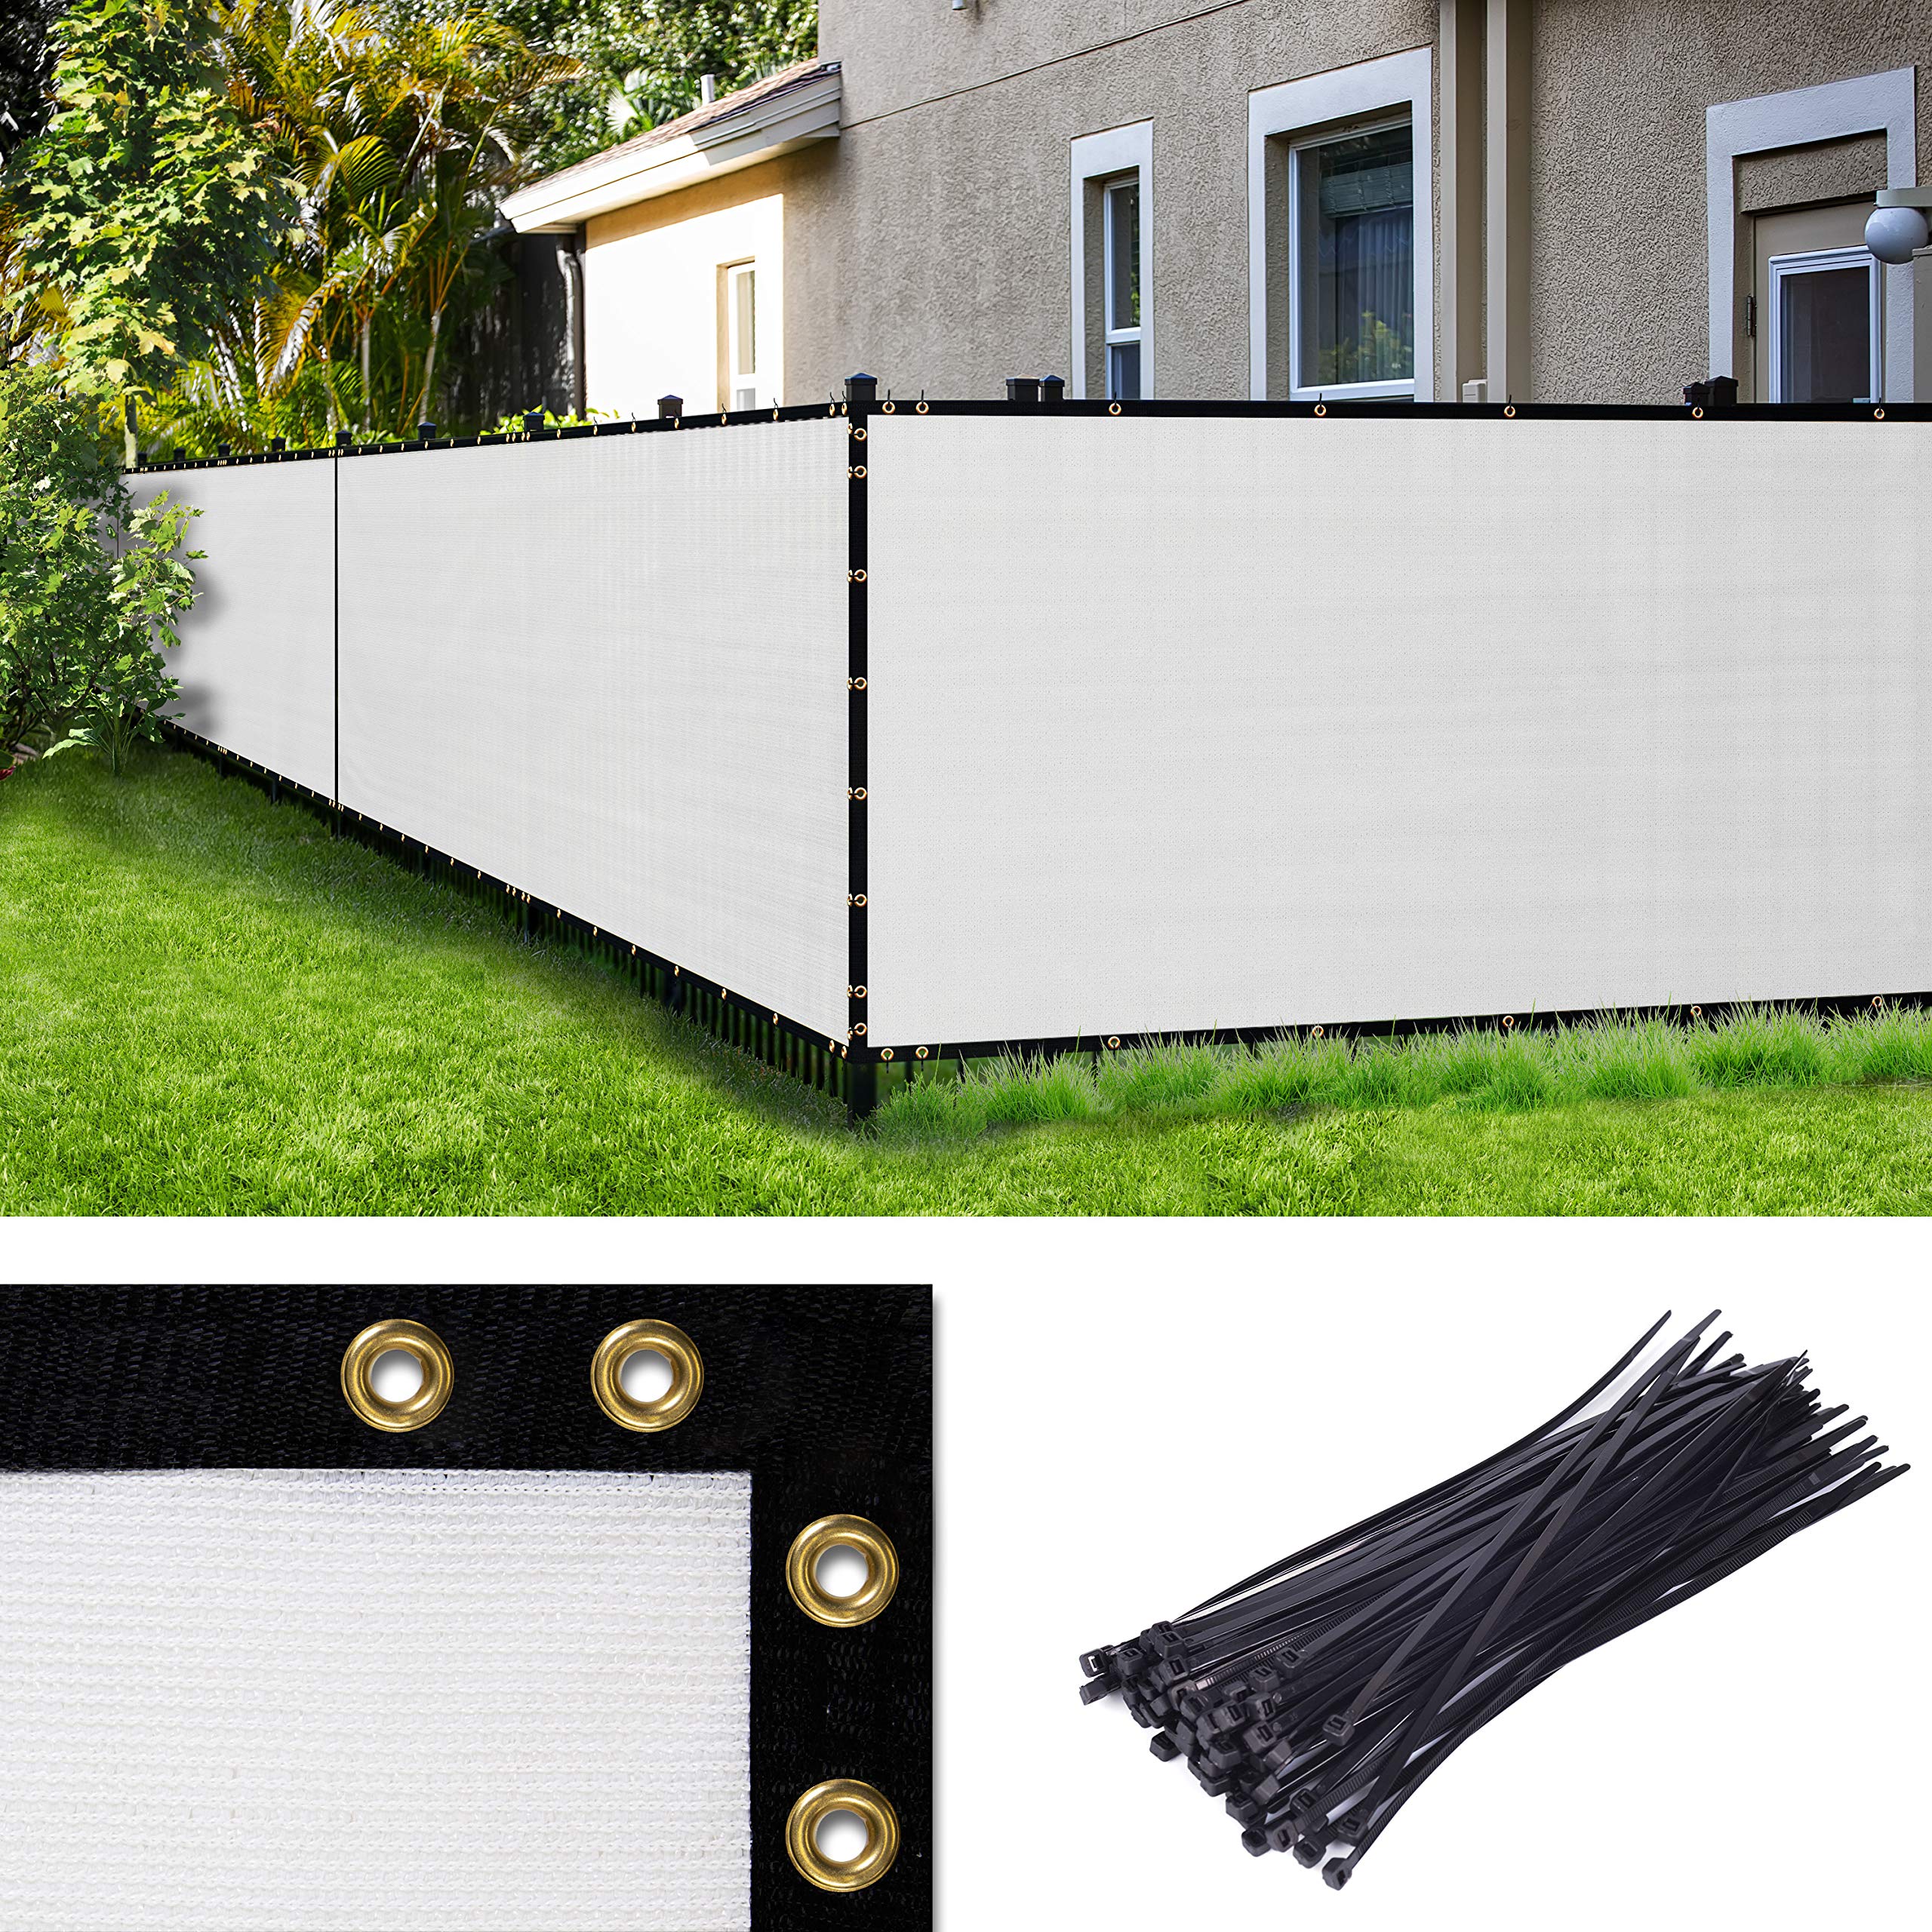 Amgo custom Made 4 x 196 custom Made Size White Fence Privacy Screen Windscreen,with Bindings & grommets Heavy Duty comm